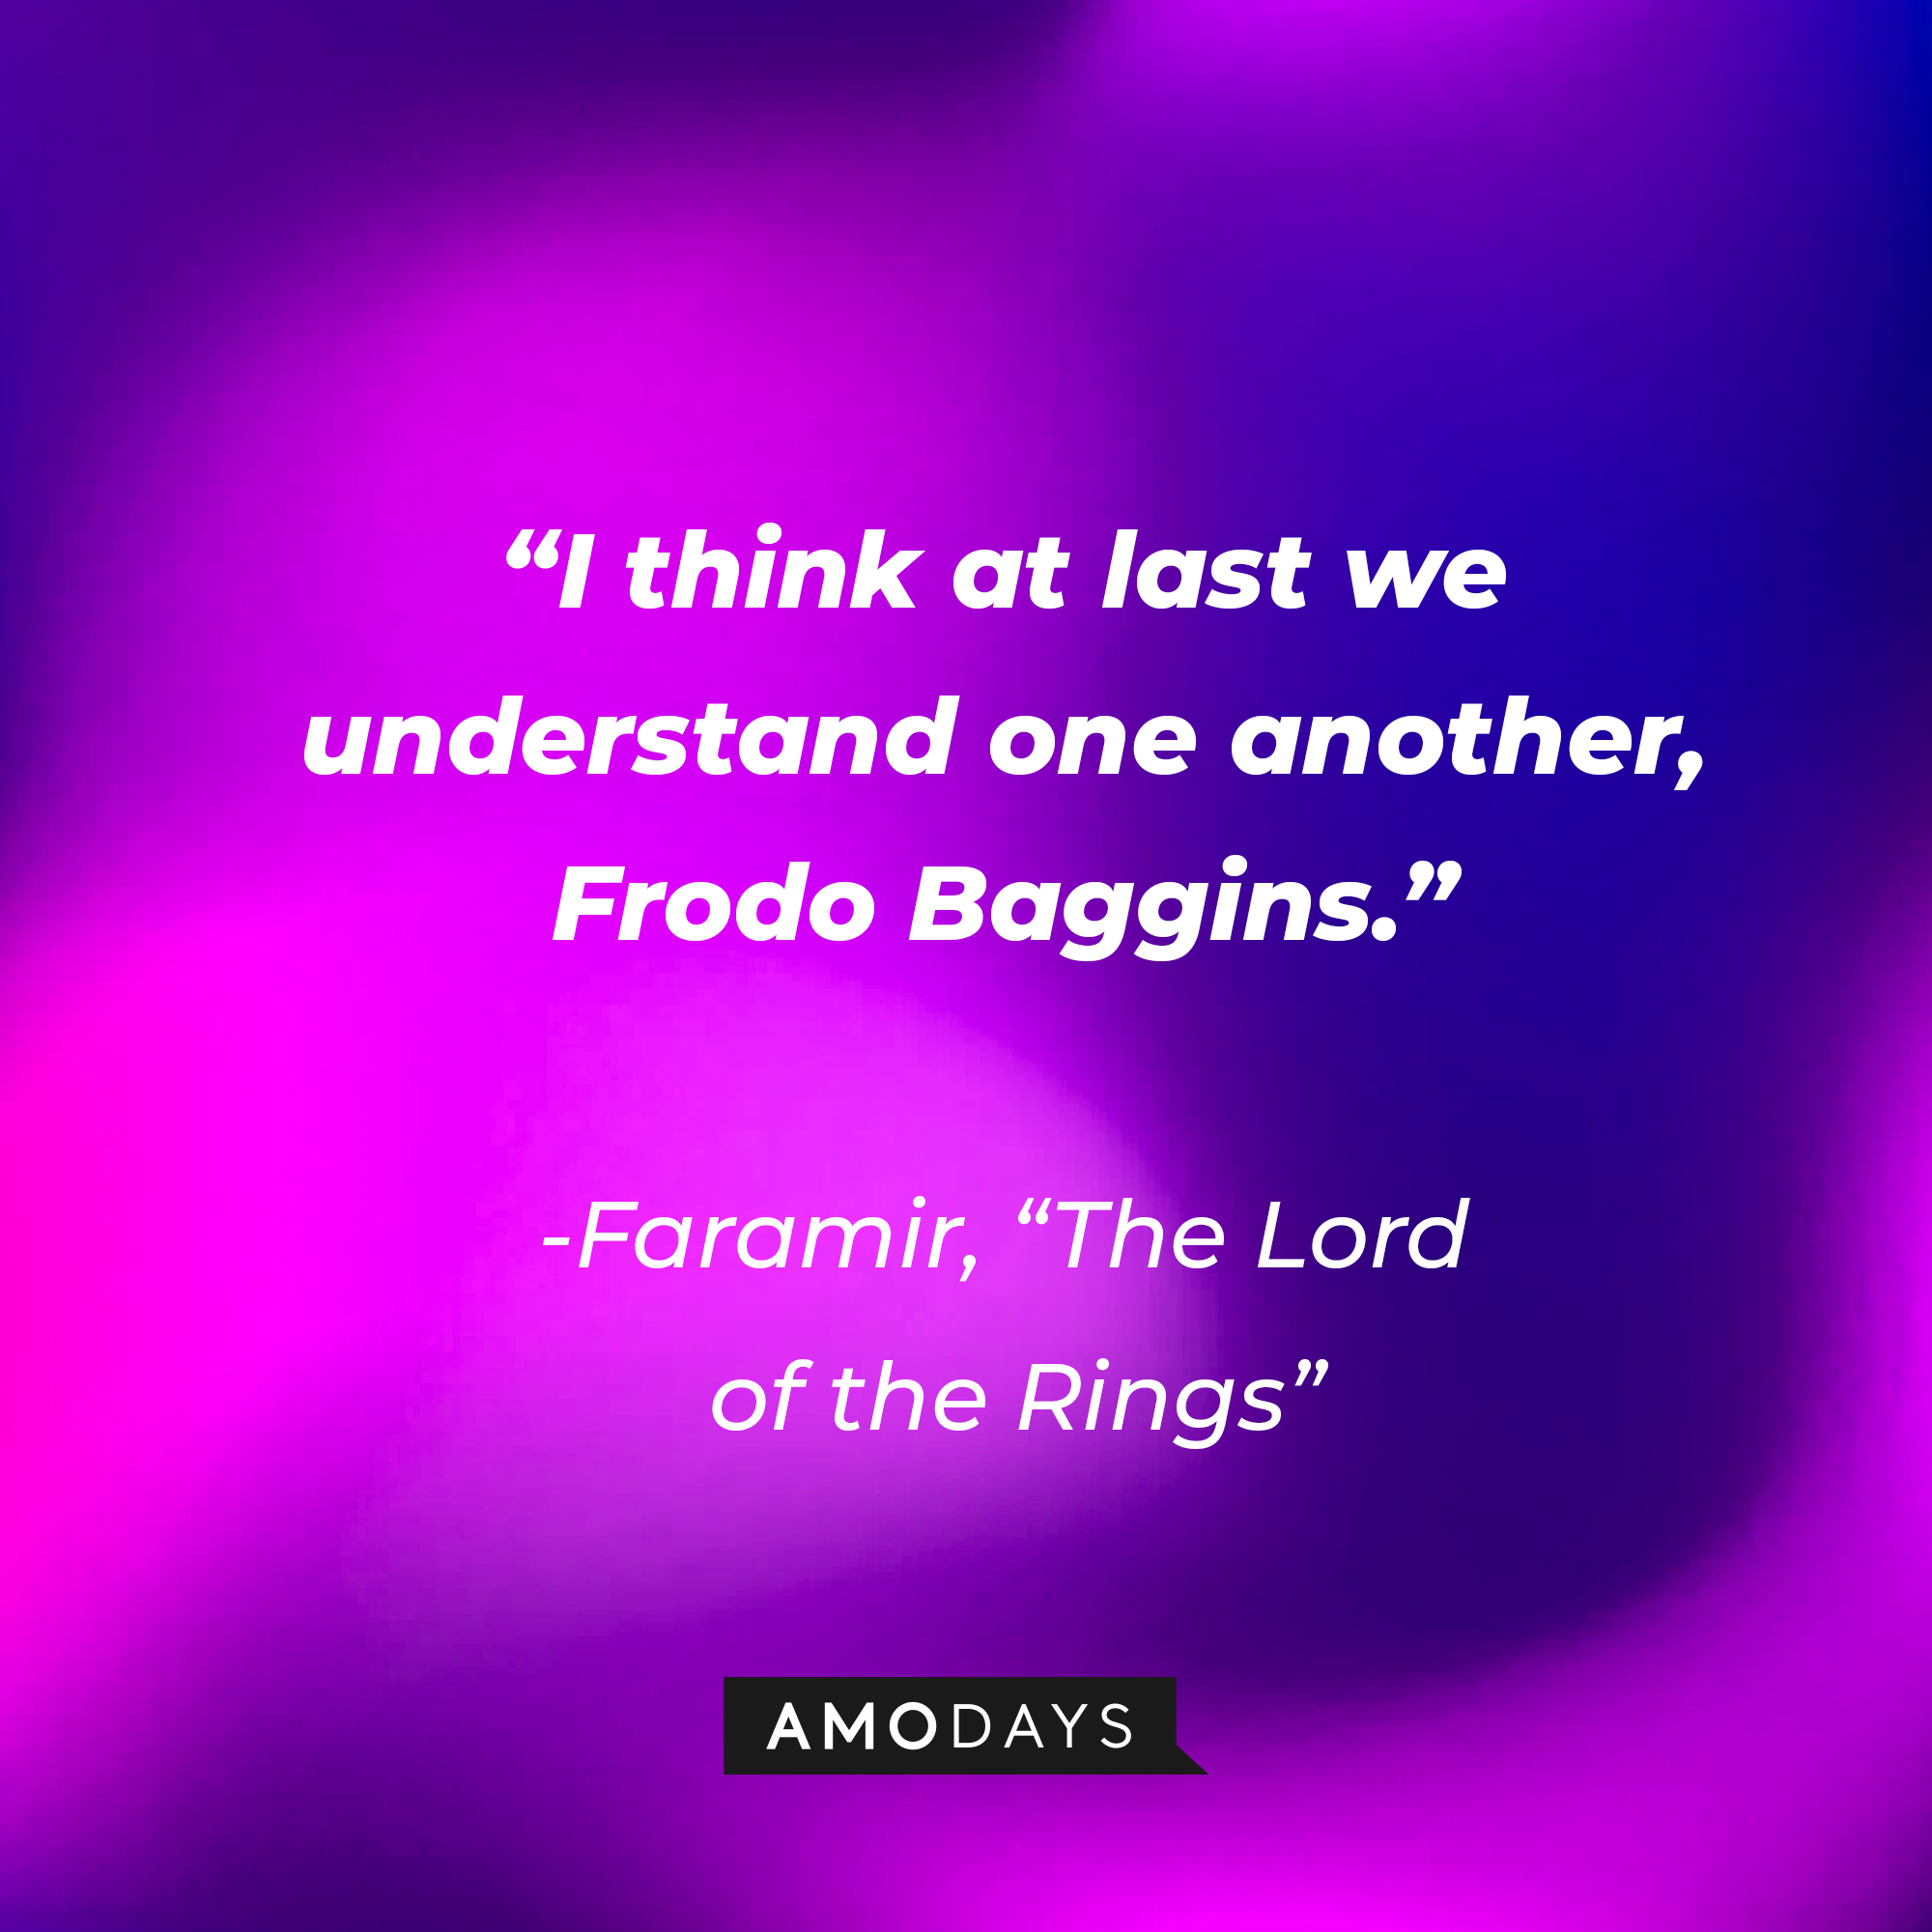 Faramir's quote from "The Lord of the Rings": "I think at last we understand one another, Frodo Baggins." | Source: AmoDays